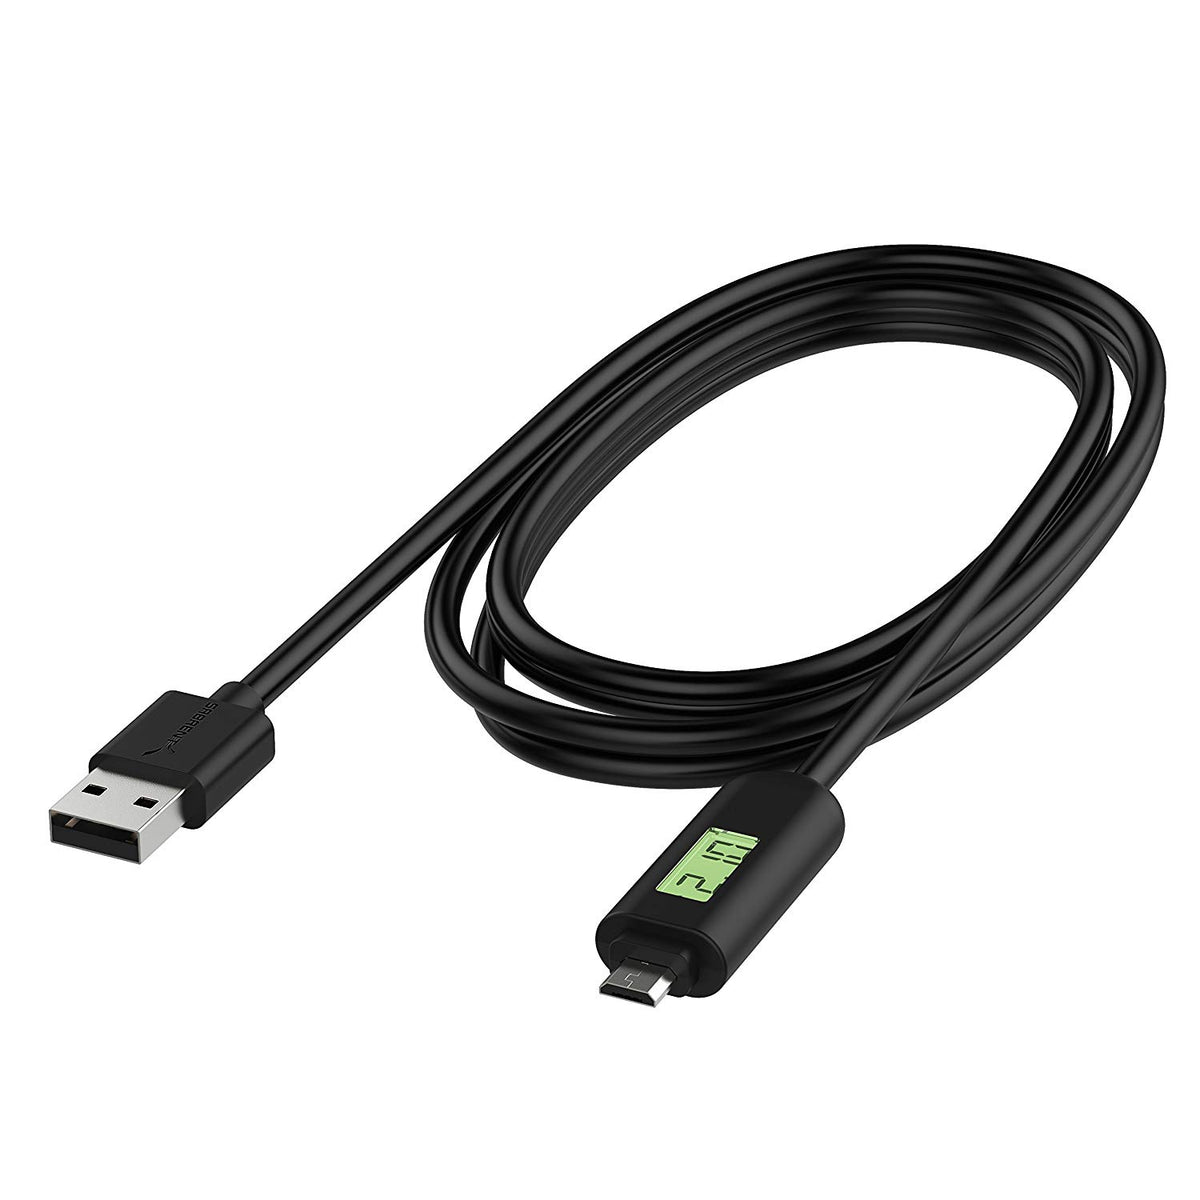 Micro USB cable with Voltage and Ampere Monitor (6 FT)